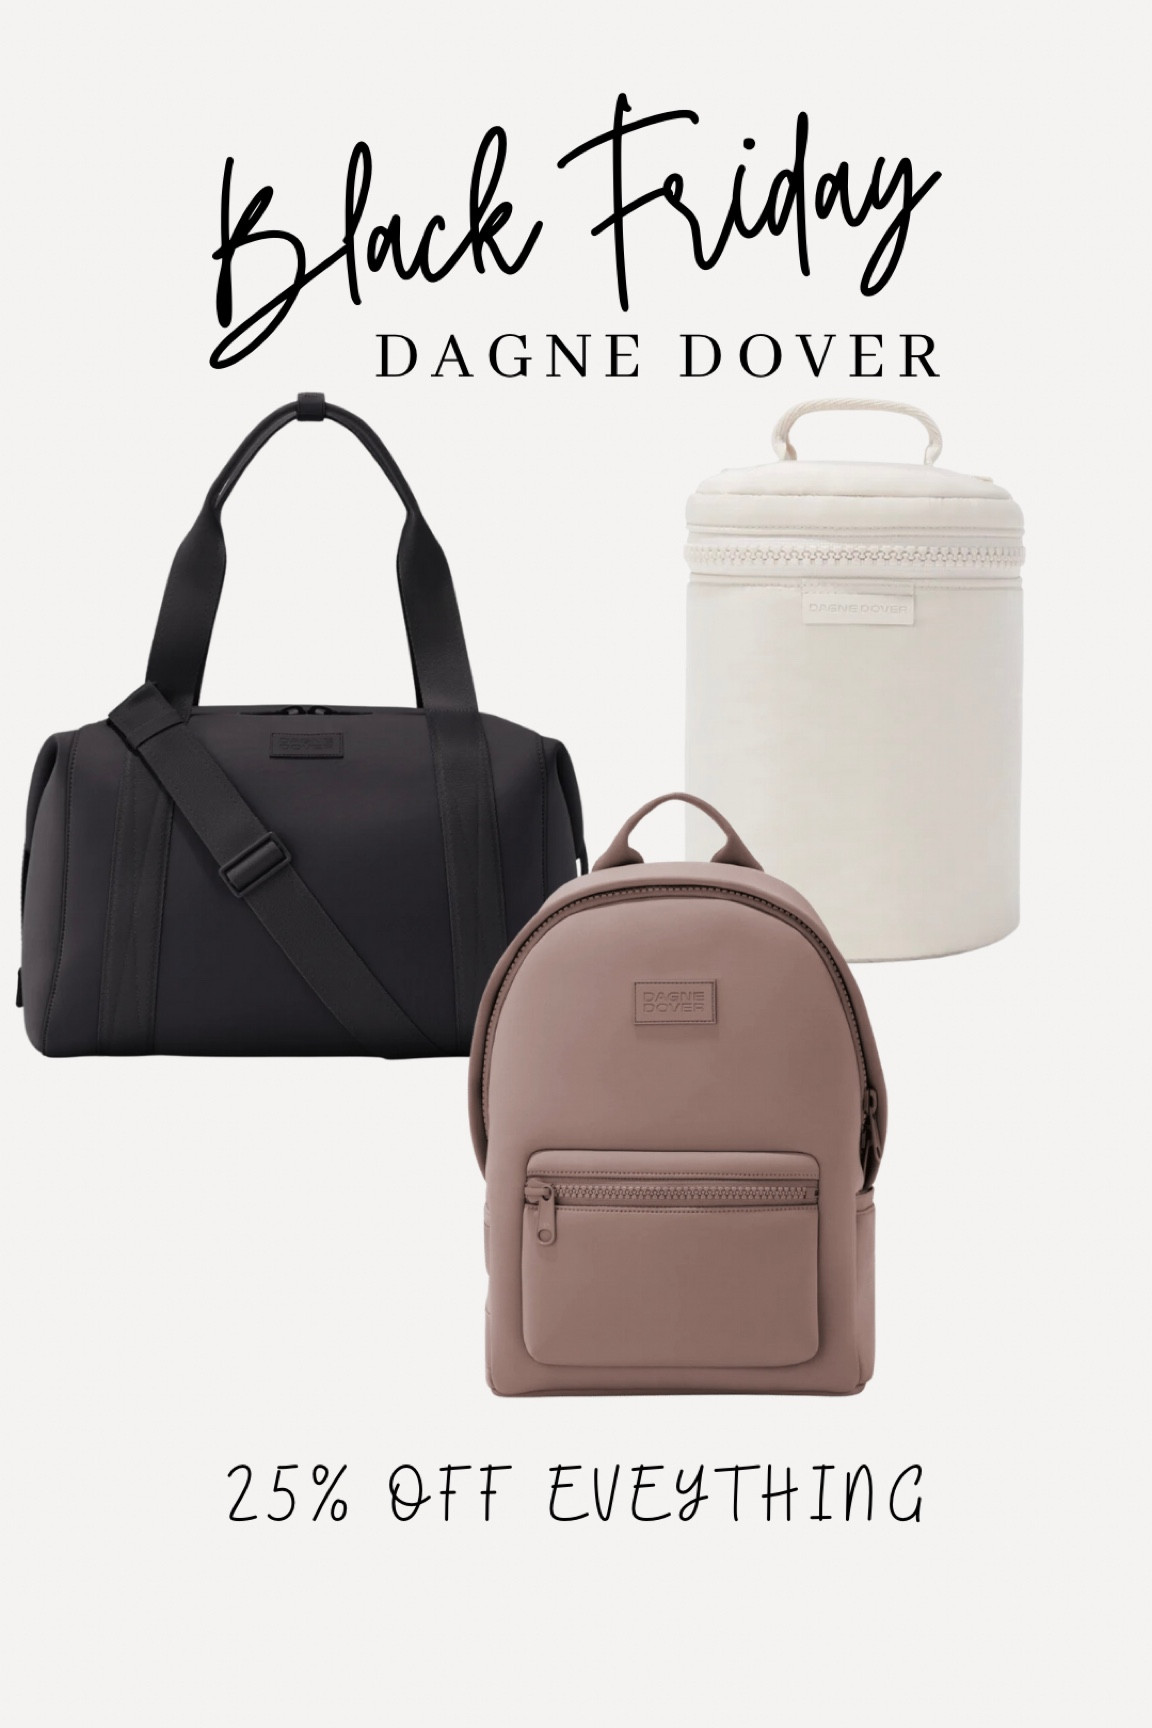 Dagne Dover's Black Friday sale starts next week and everything